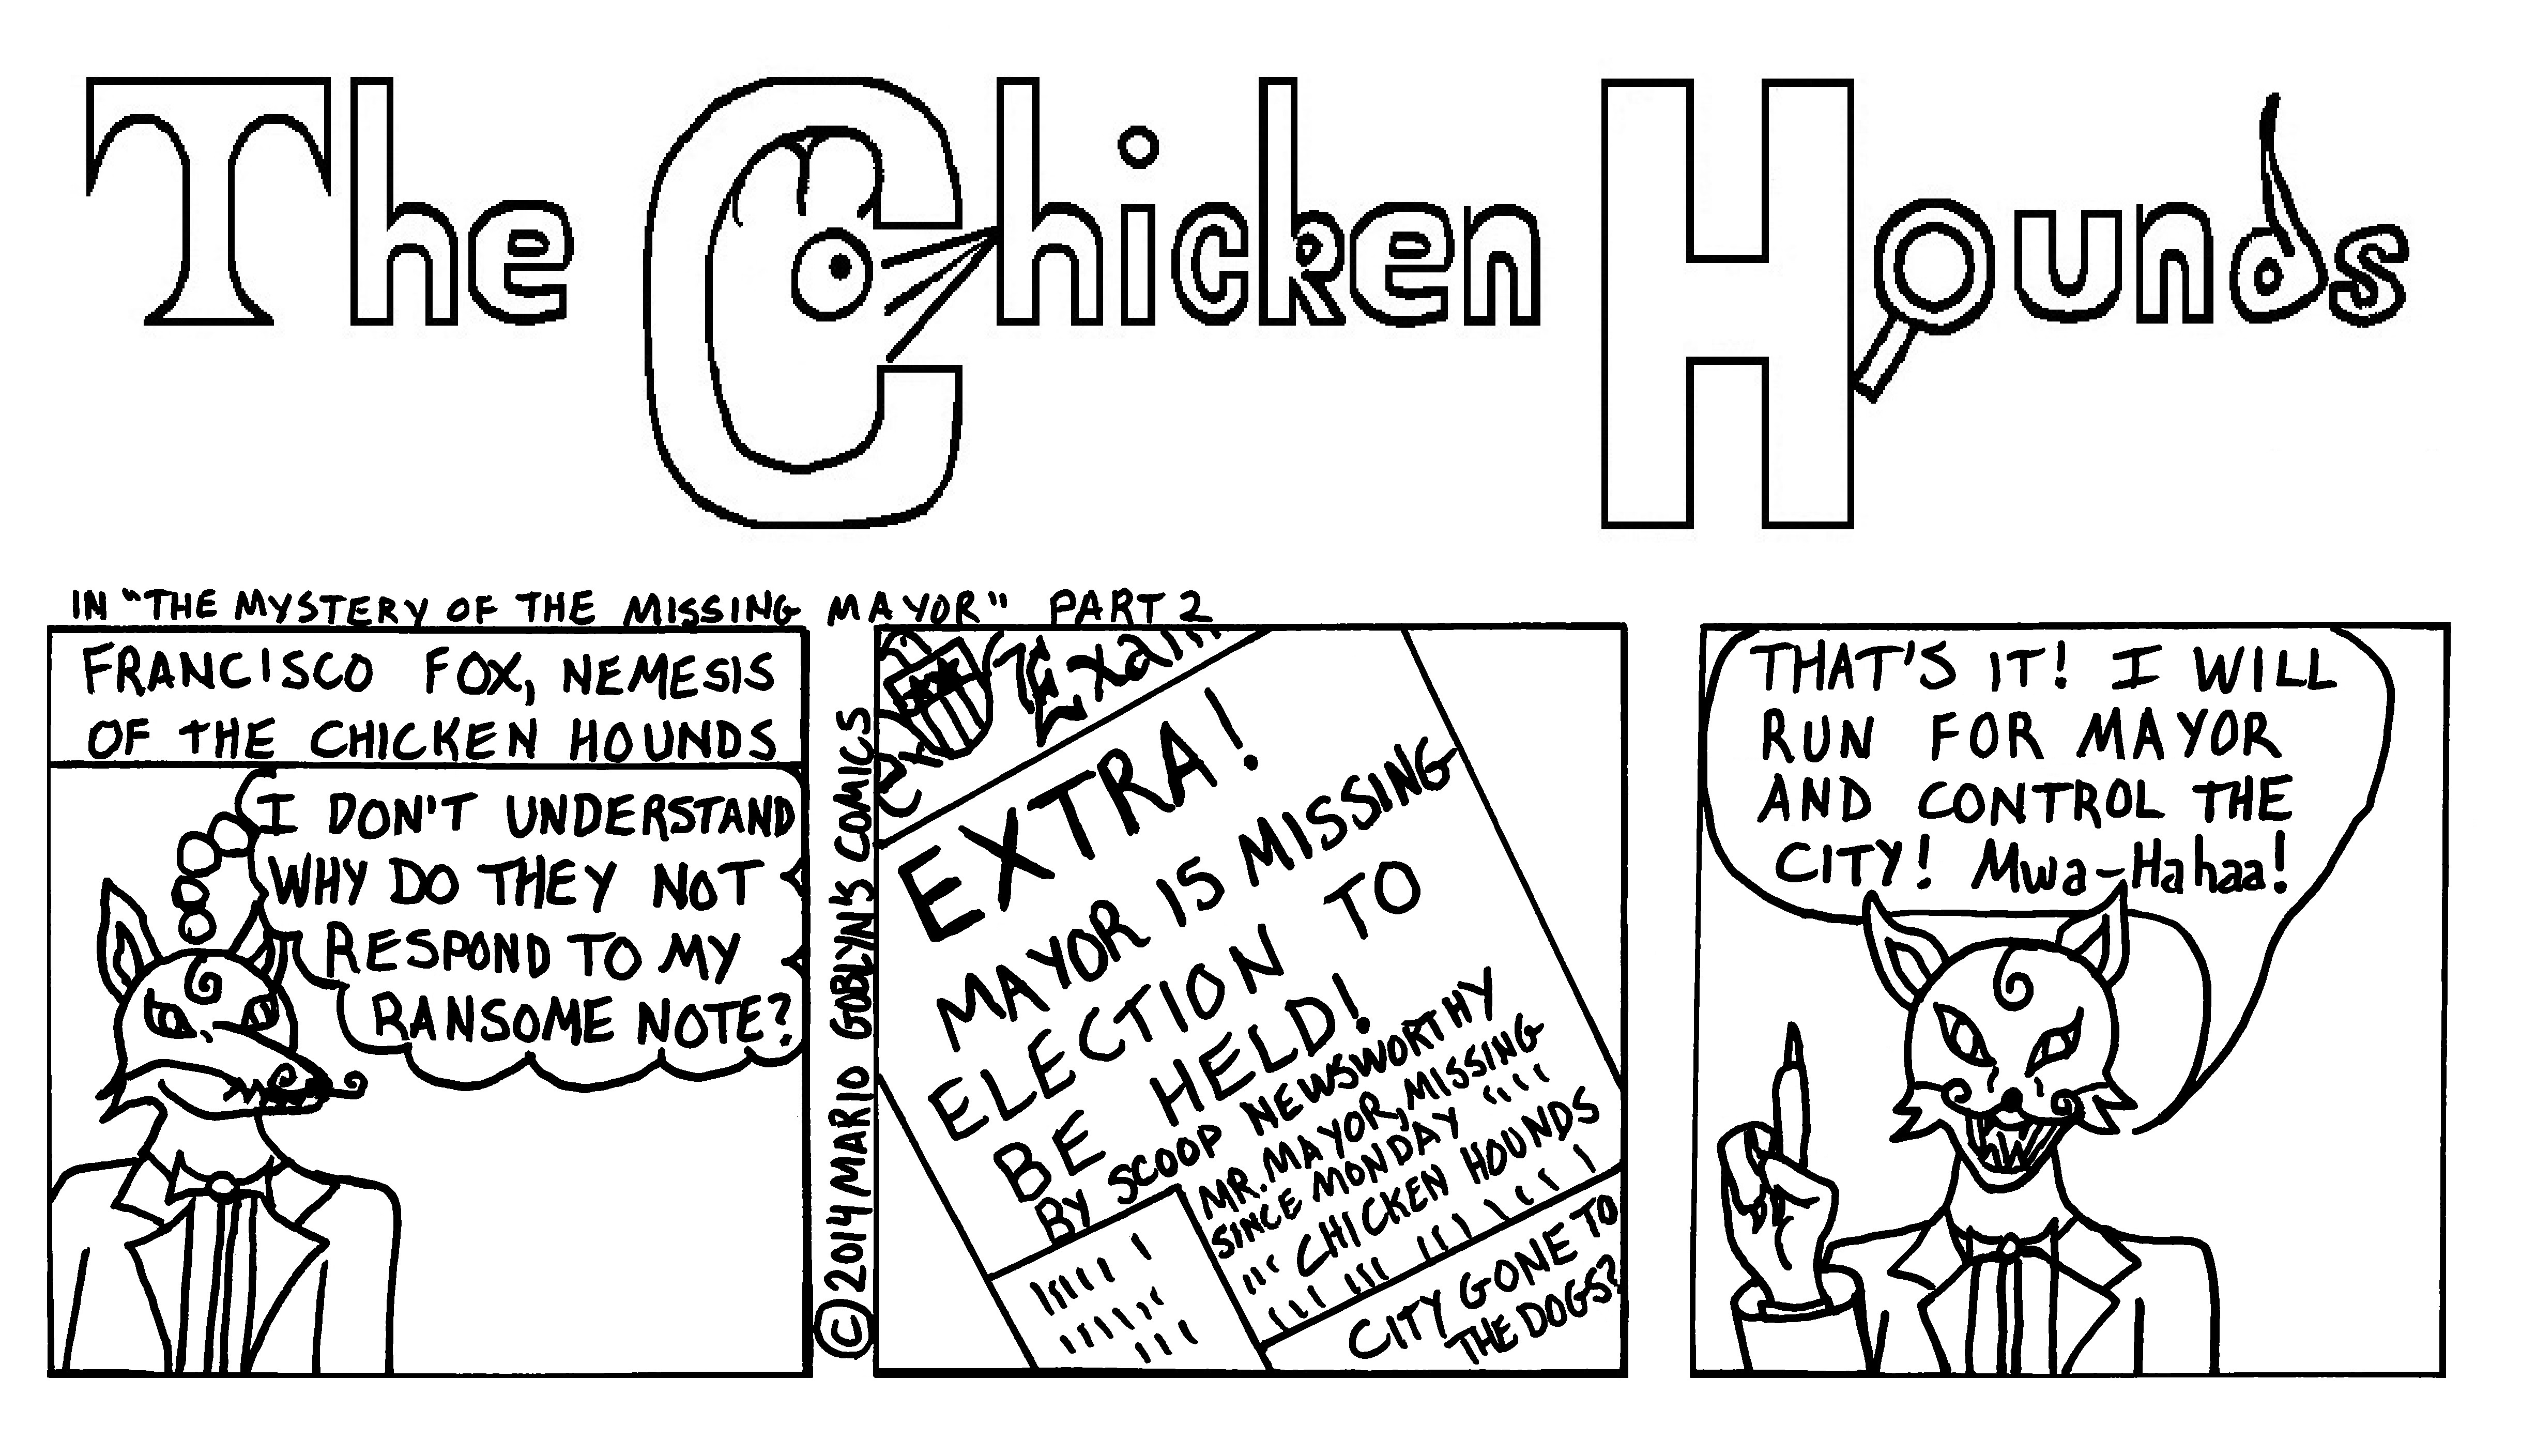 The Chicken Hounds, San Francisco's Greatest Detectives, in "The Mystery of the Missing Mayor" Part 2.